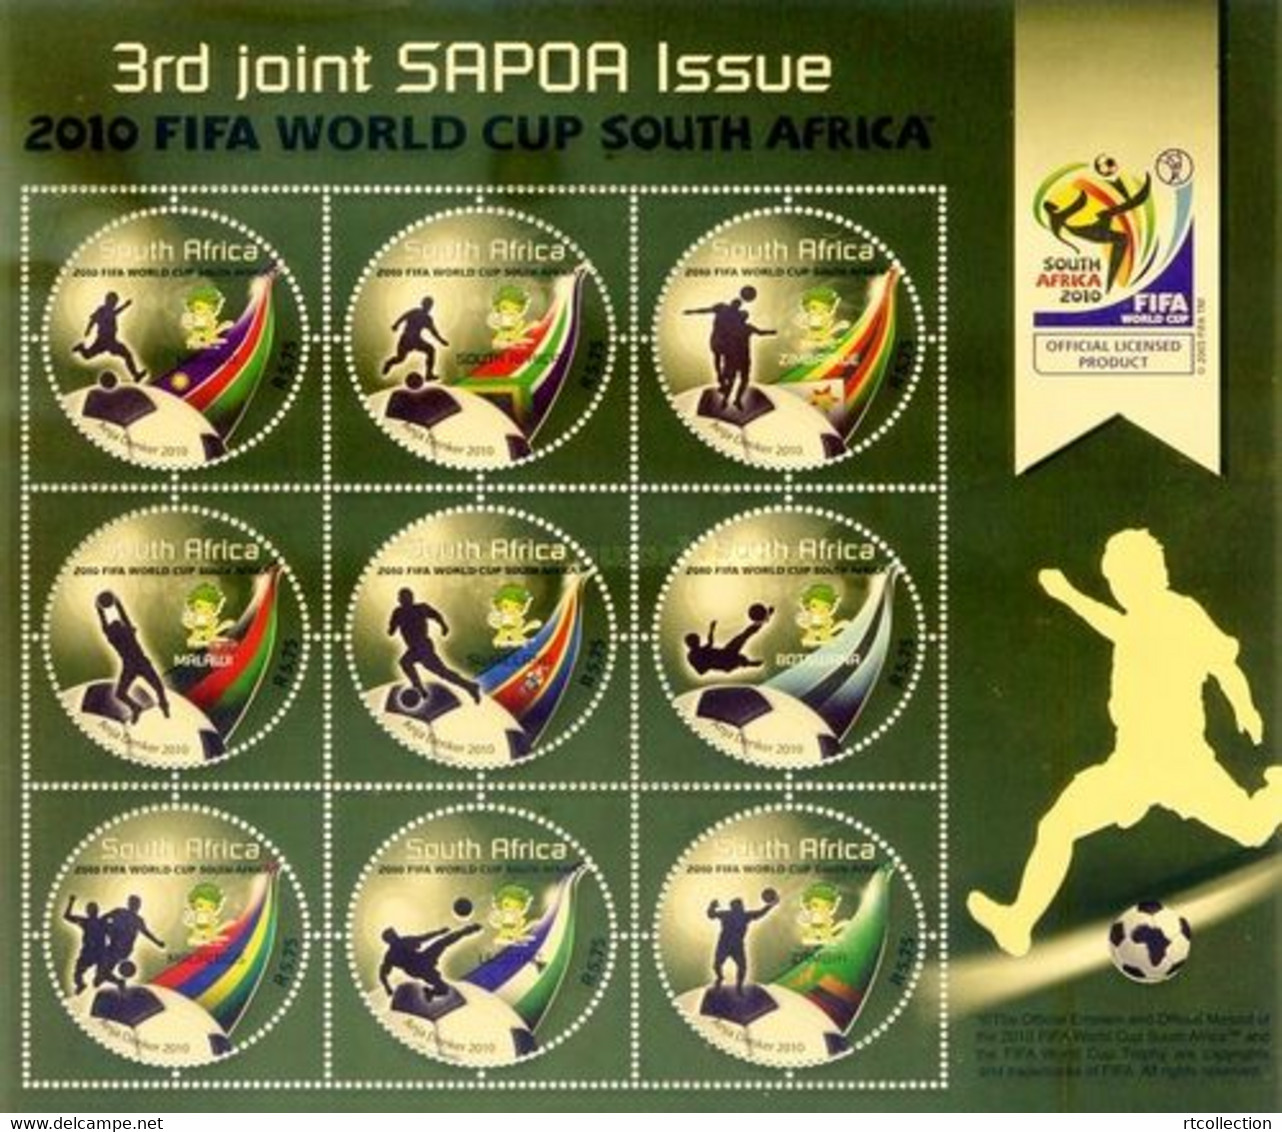 South Africa RSA 2010 Sheet 3rd Joint SAPOA Issue FIFA World Cup Football Game Soccer Sports Round Shap Stamps MNH - Neufs